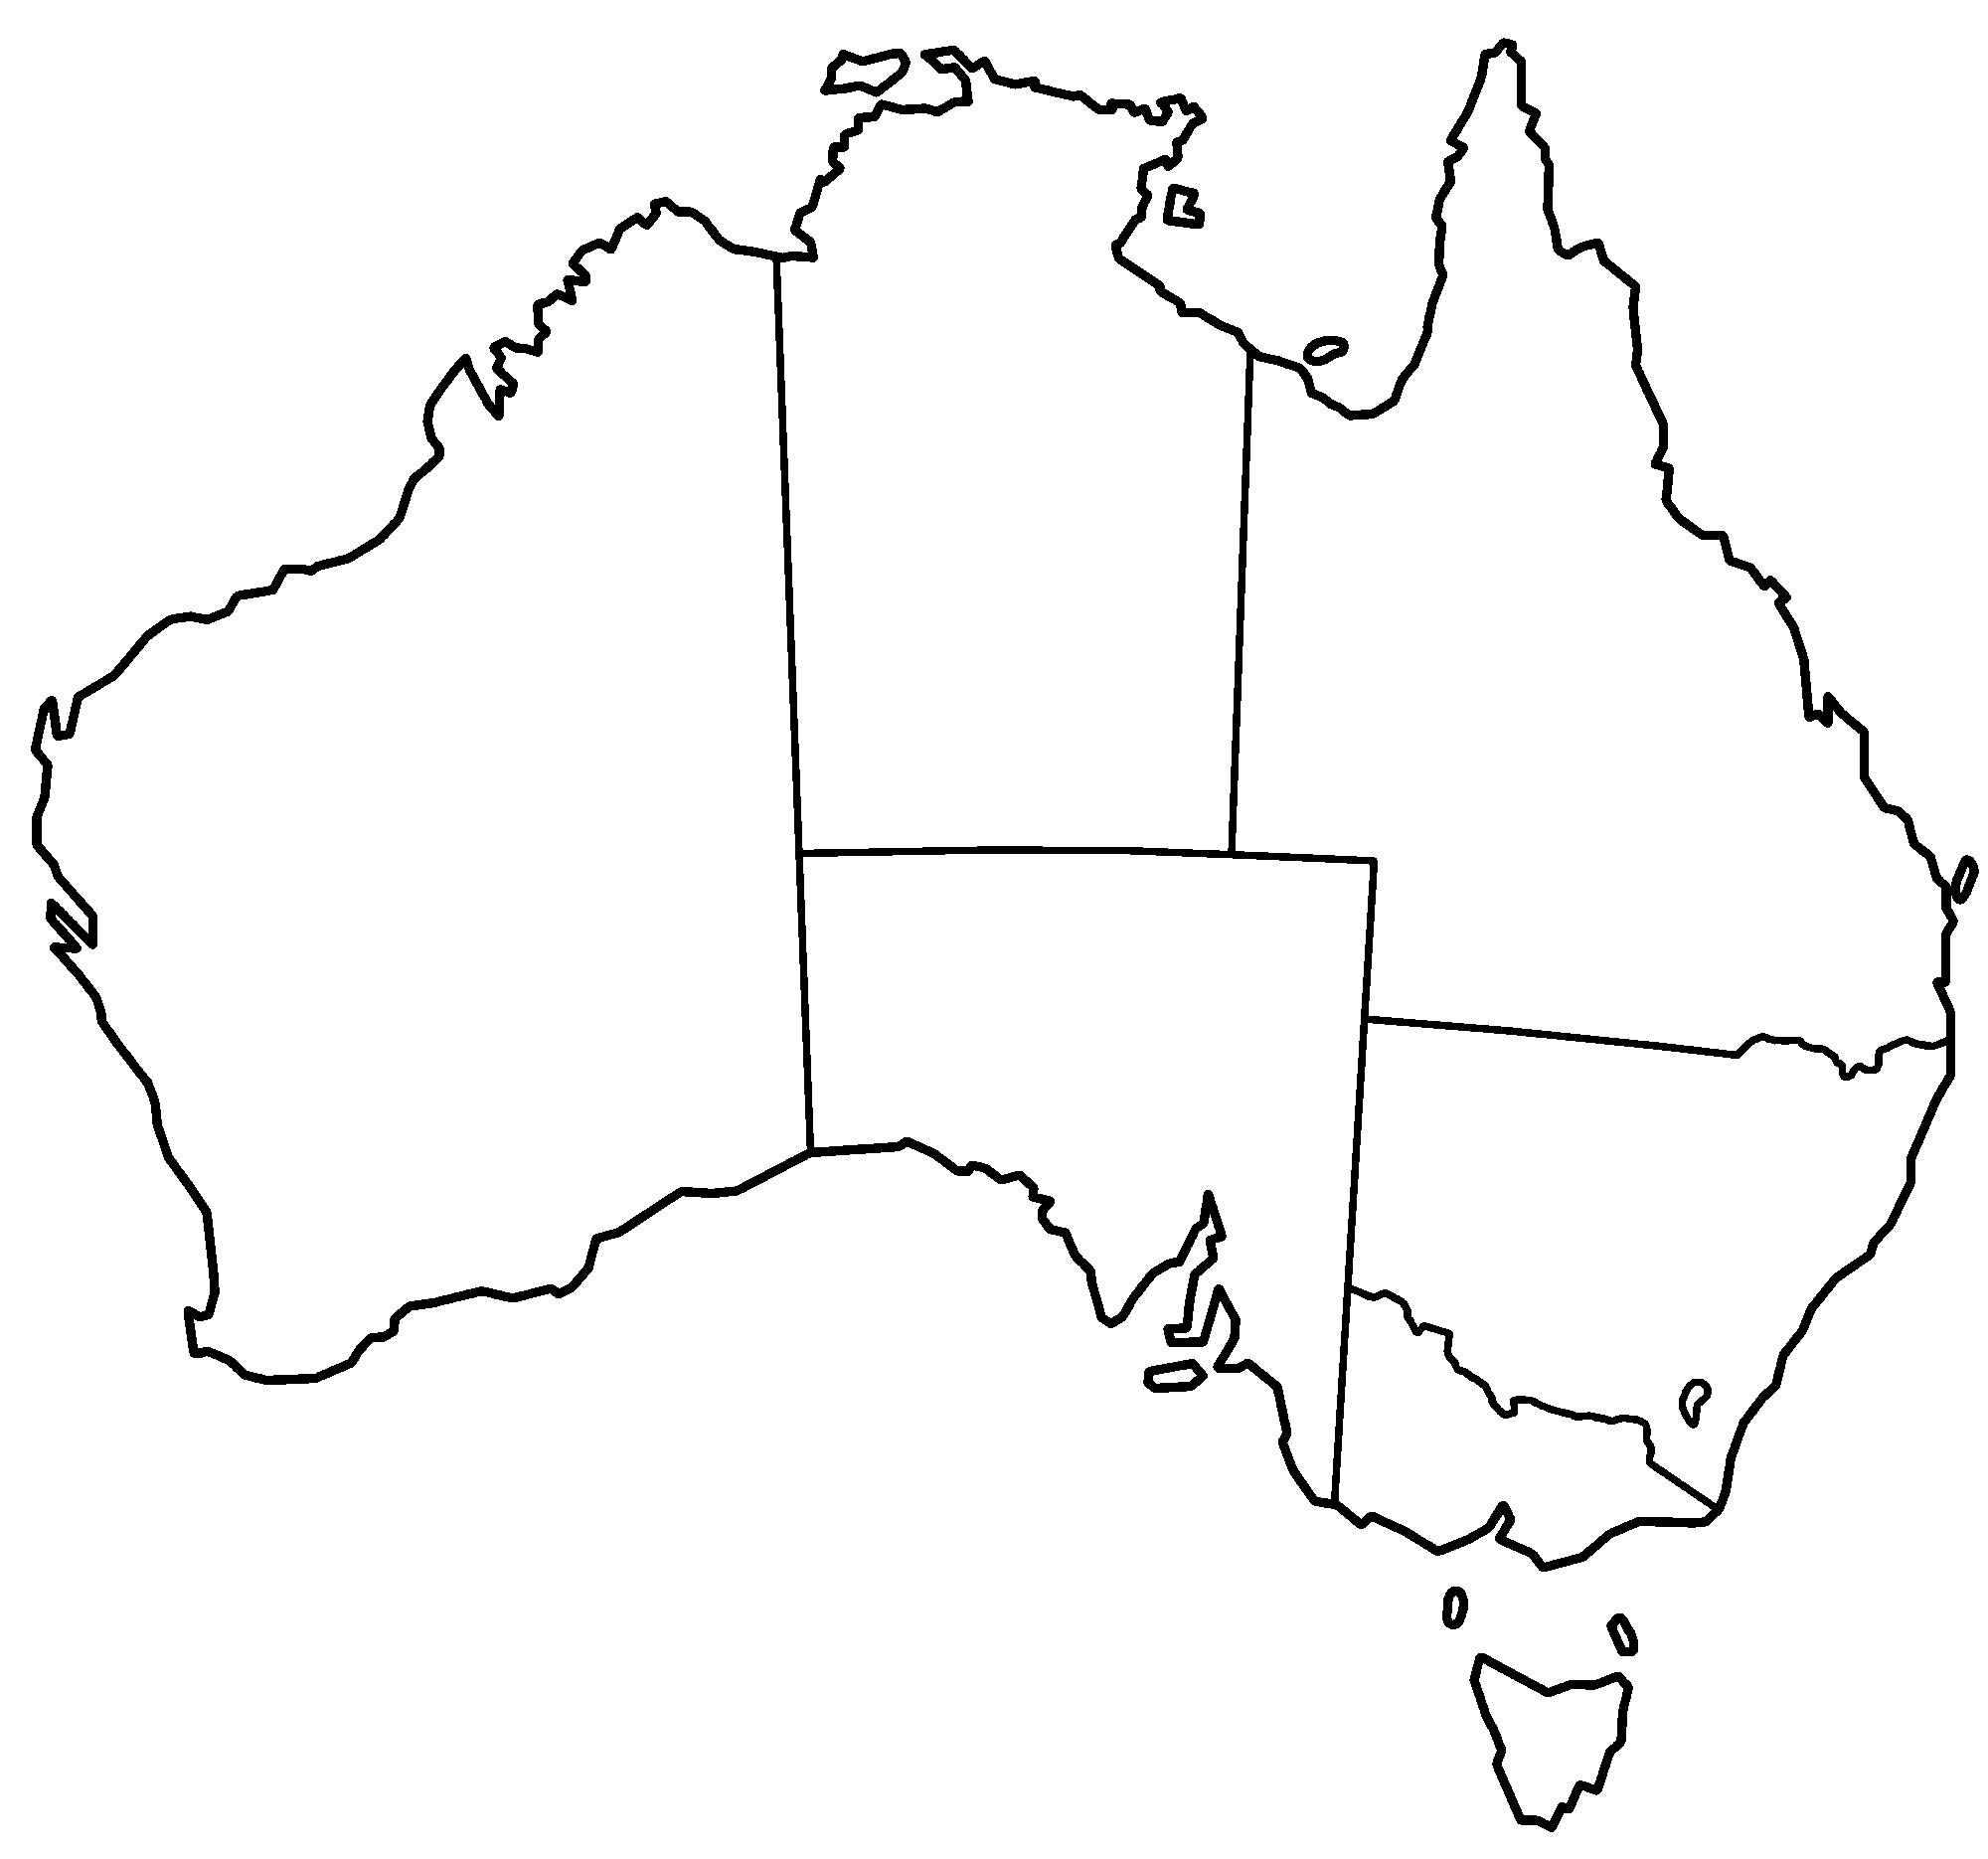 Blank map of Australia: outline map and vector map of Australia